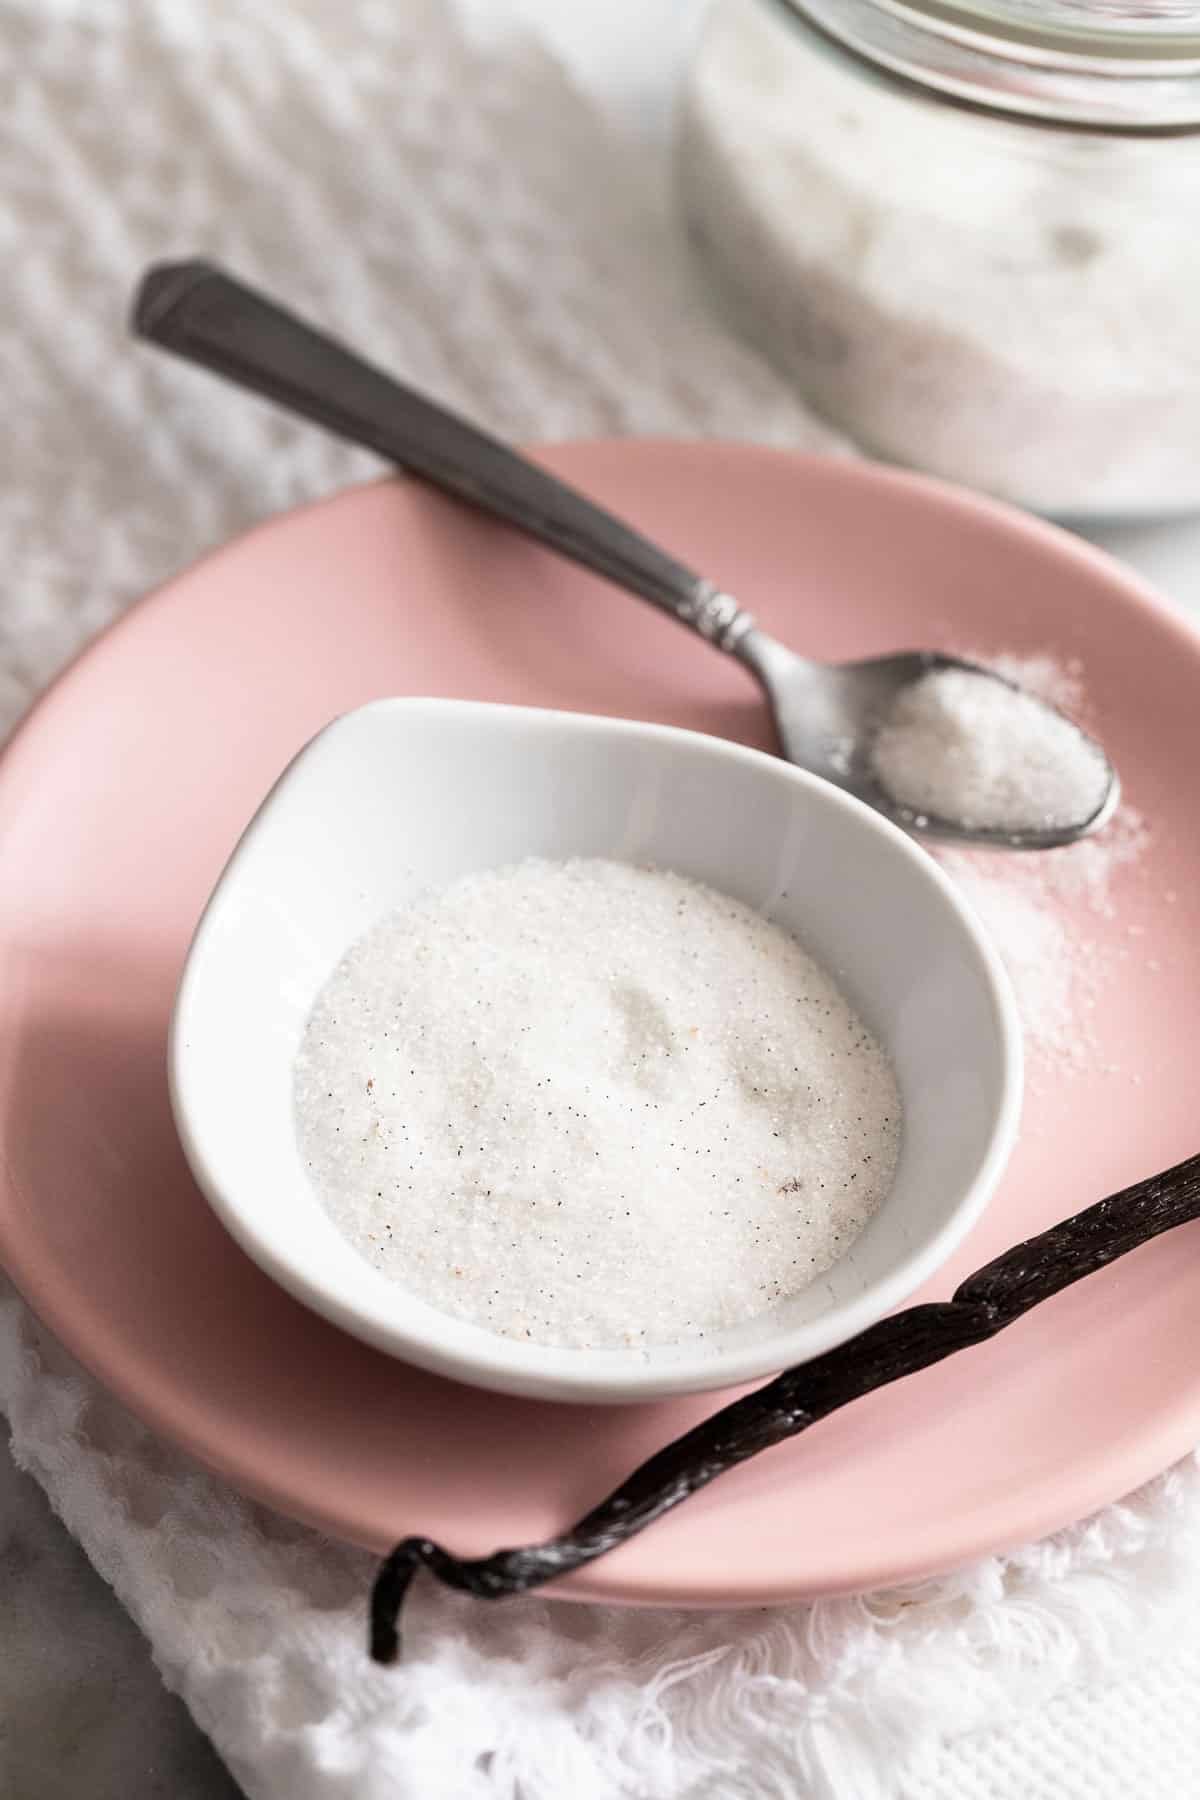 A small bowl filled with vanilla sugar on a pink plate with a spoon and vanilla bean next to it.